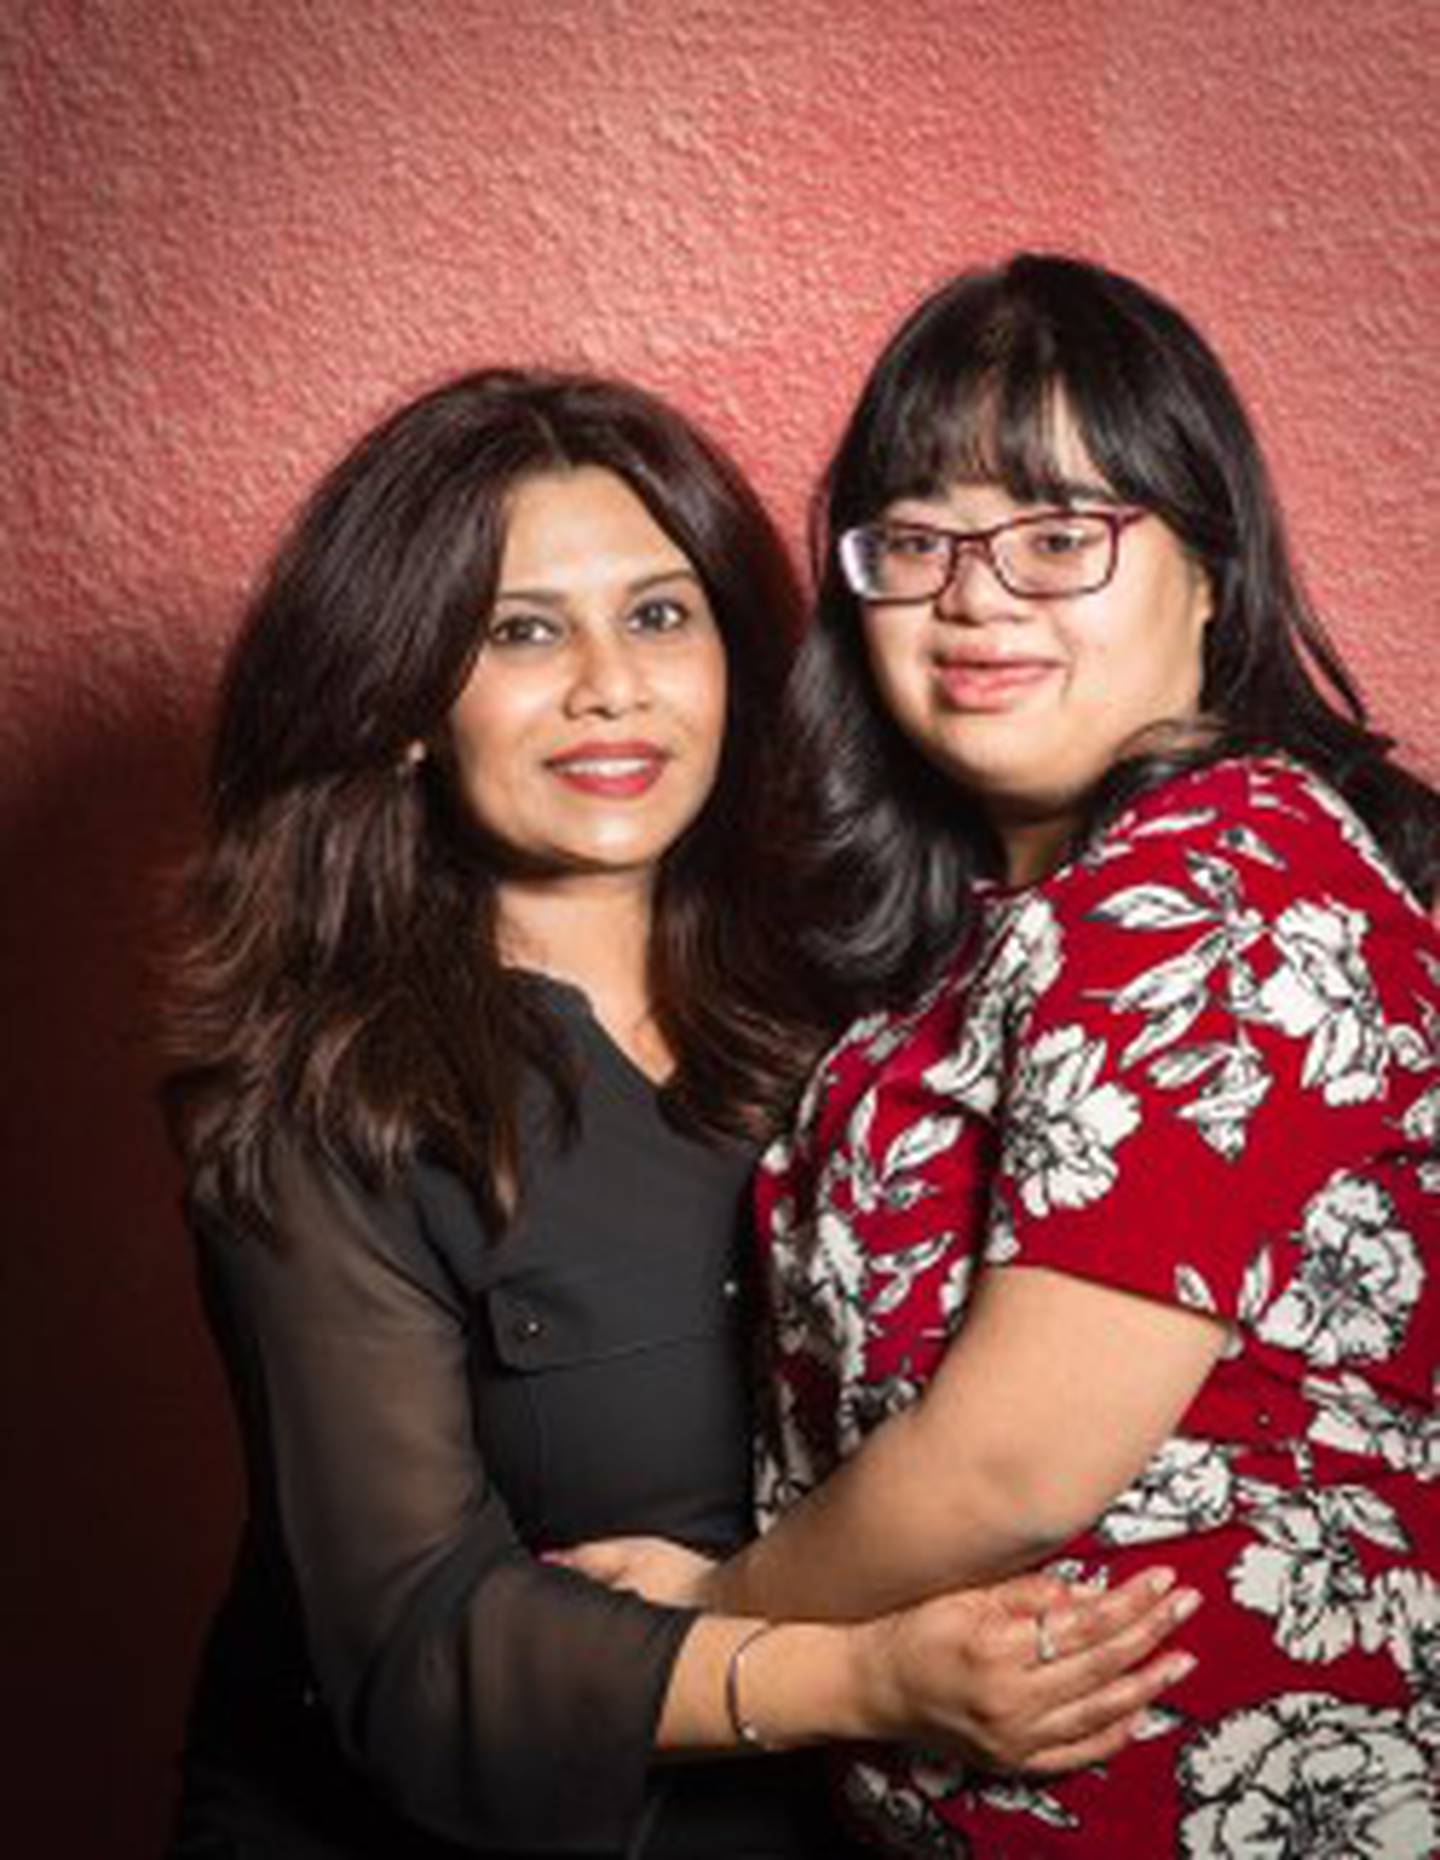 Rosy Ahmed, founder of Fame, with her daughter Hana. Photo: Fame